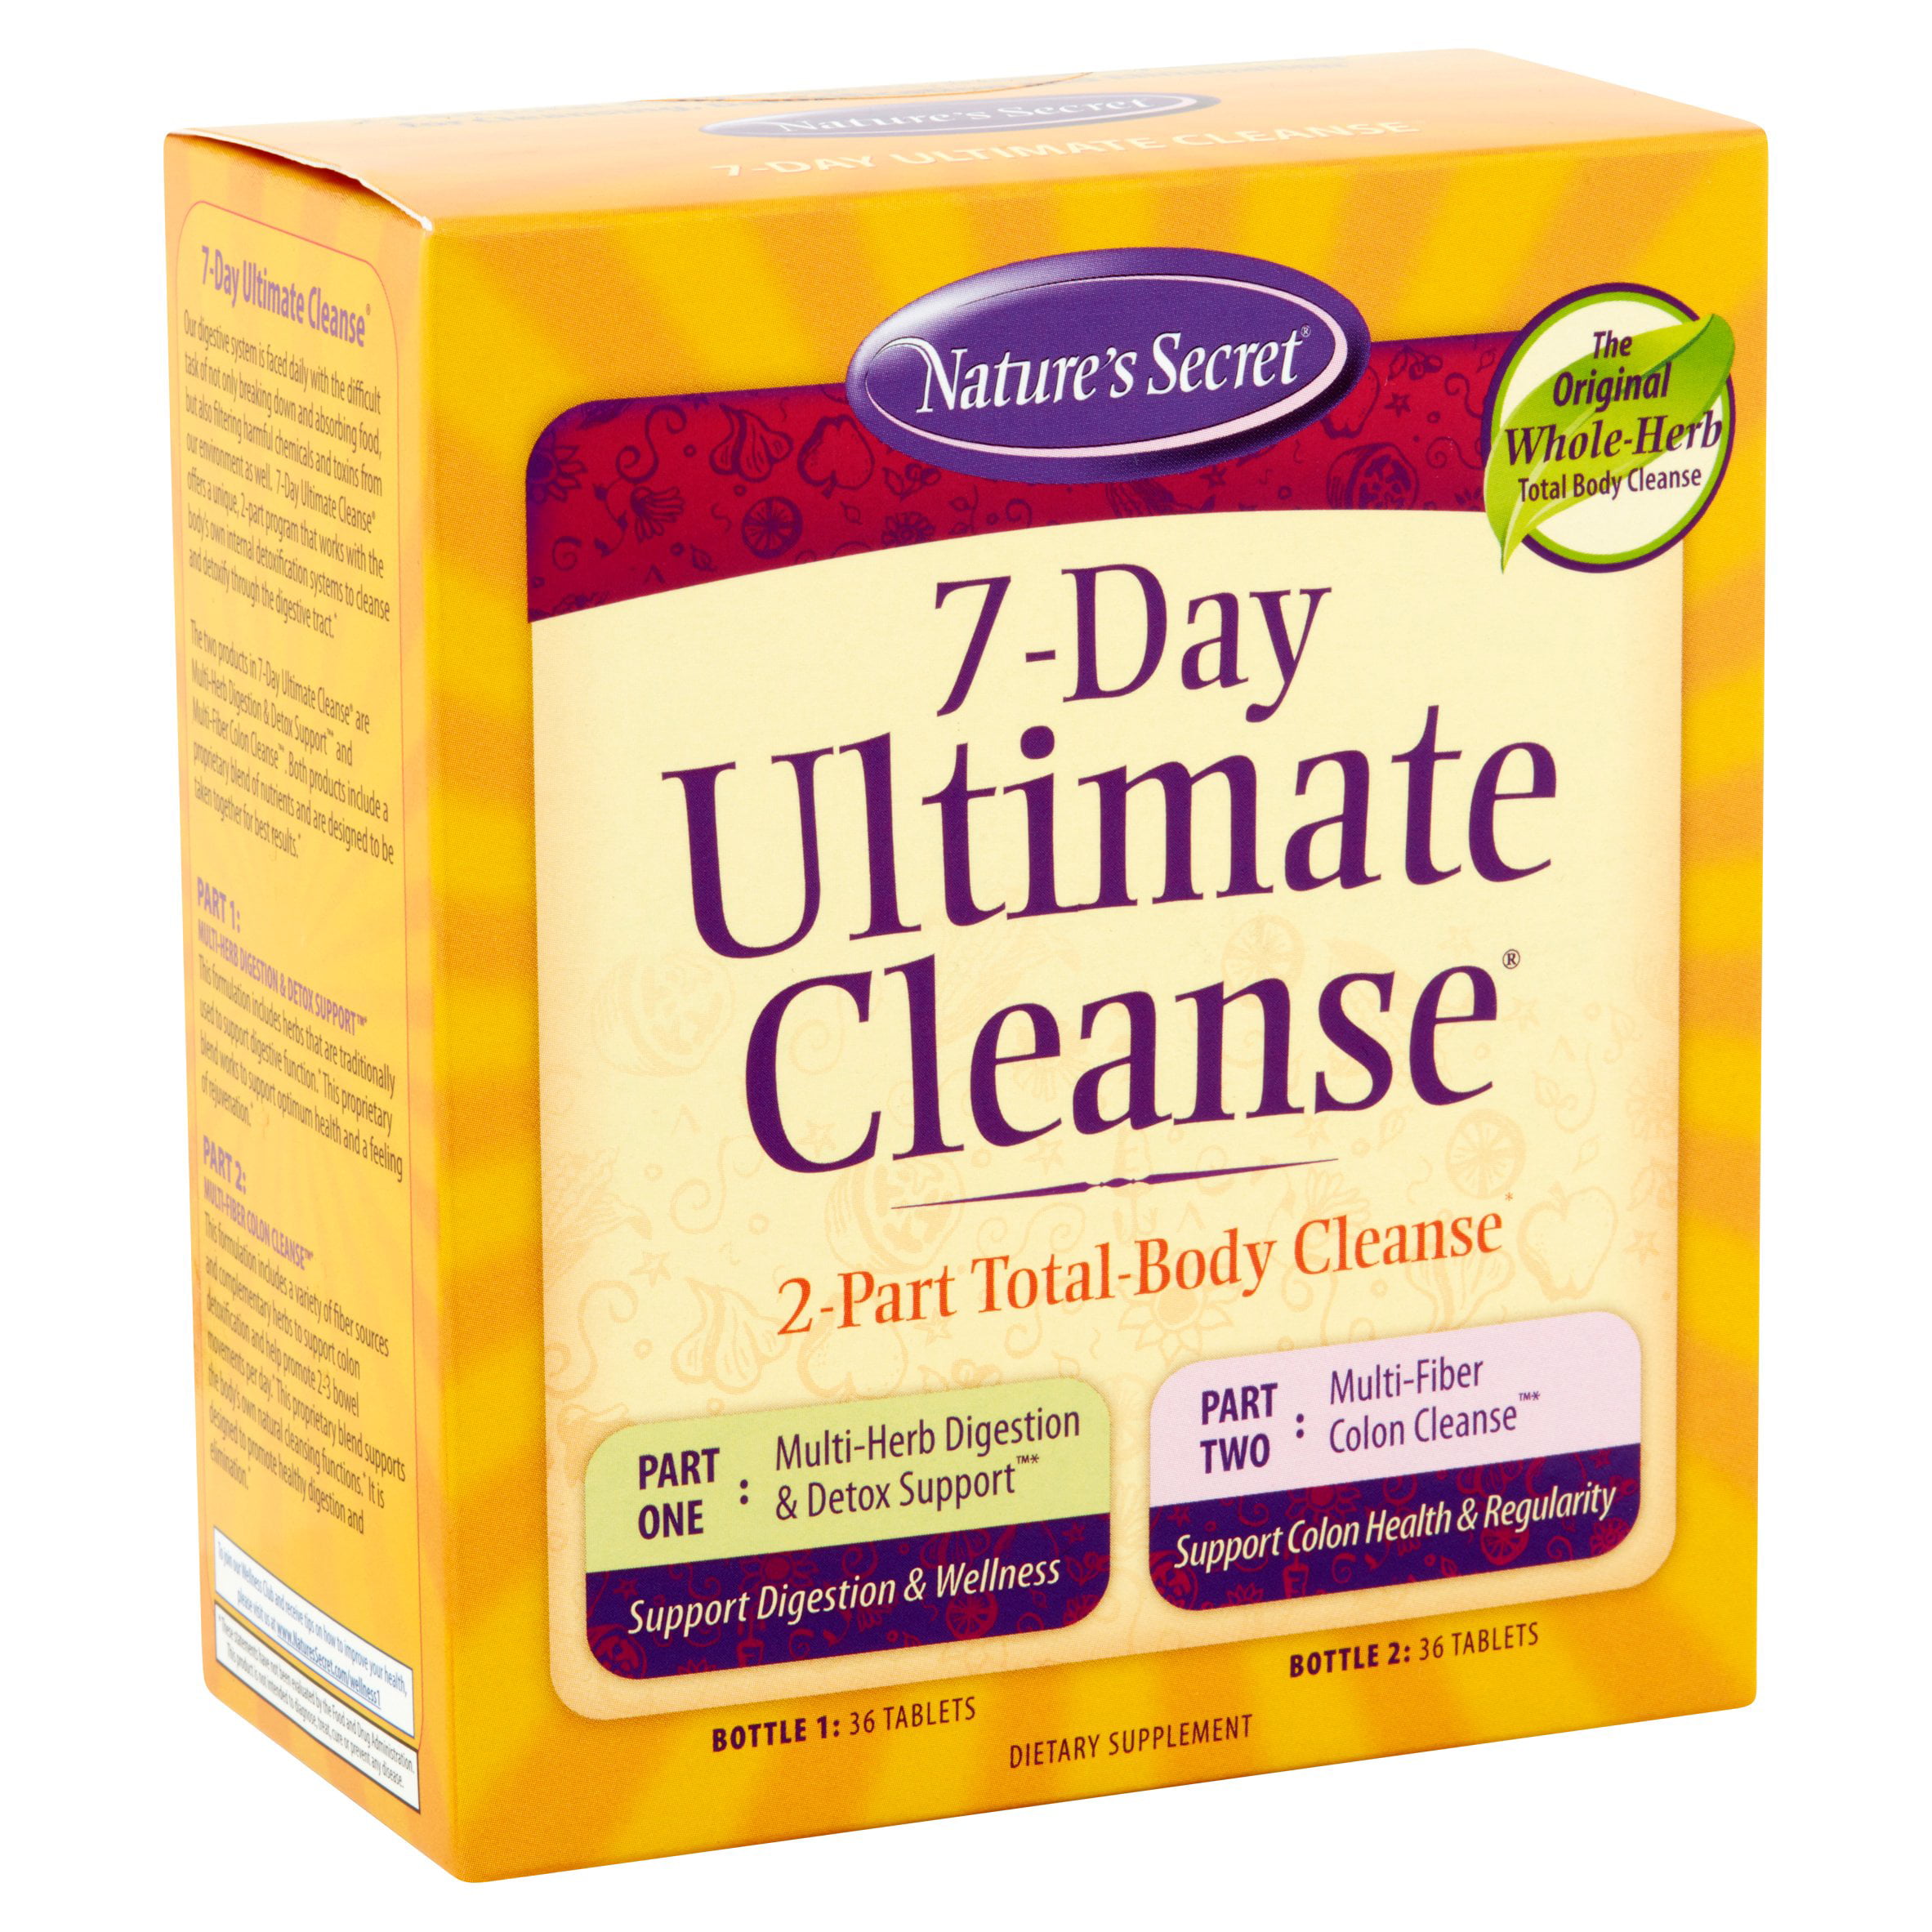 Ultimate Detox Cleanse. Cleanse Day. GNC Cleanse 7 Day. Natural Detox Diet: detailed 7-Day Liver Cleanse Plan. Cleanse s